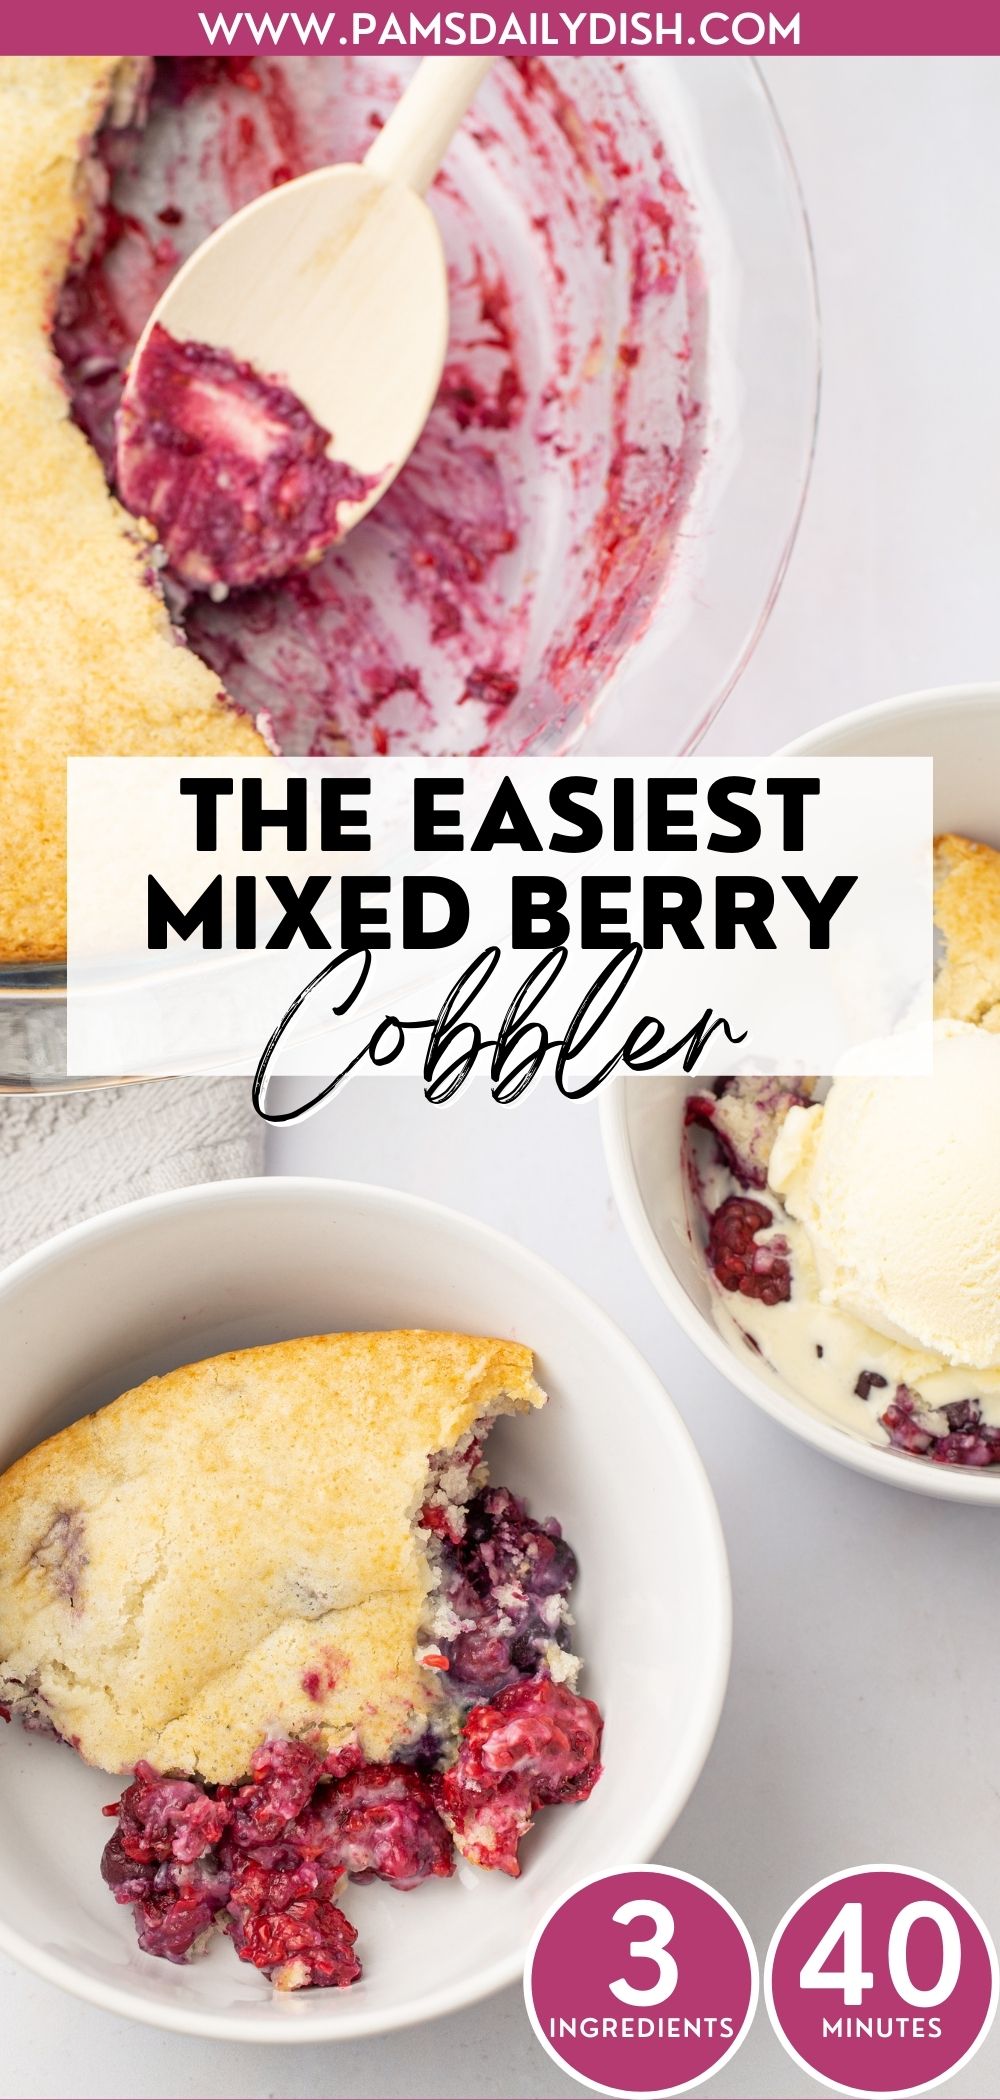 This is the easiest mixed berry cobbler recipe! It is the perfect summer dessert and so simple to make with boxed cake, frozen berries, and seltzer. Top it with your favorite ice cream and you've got yourself a quick and easy treat the whole family will love! via @skinnydesserts